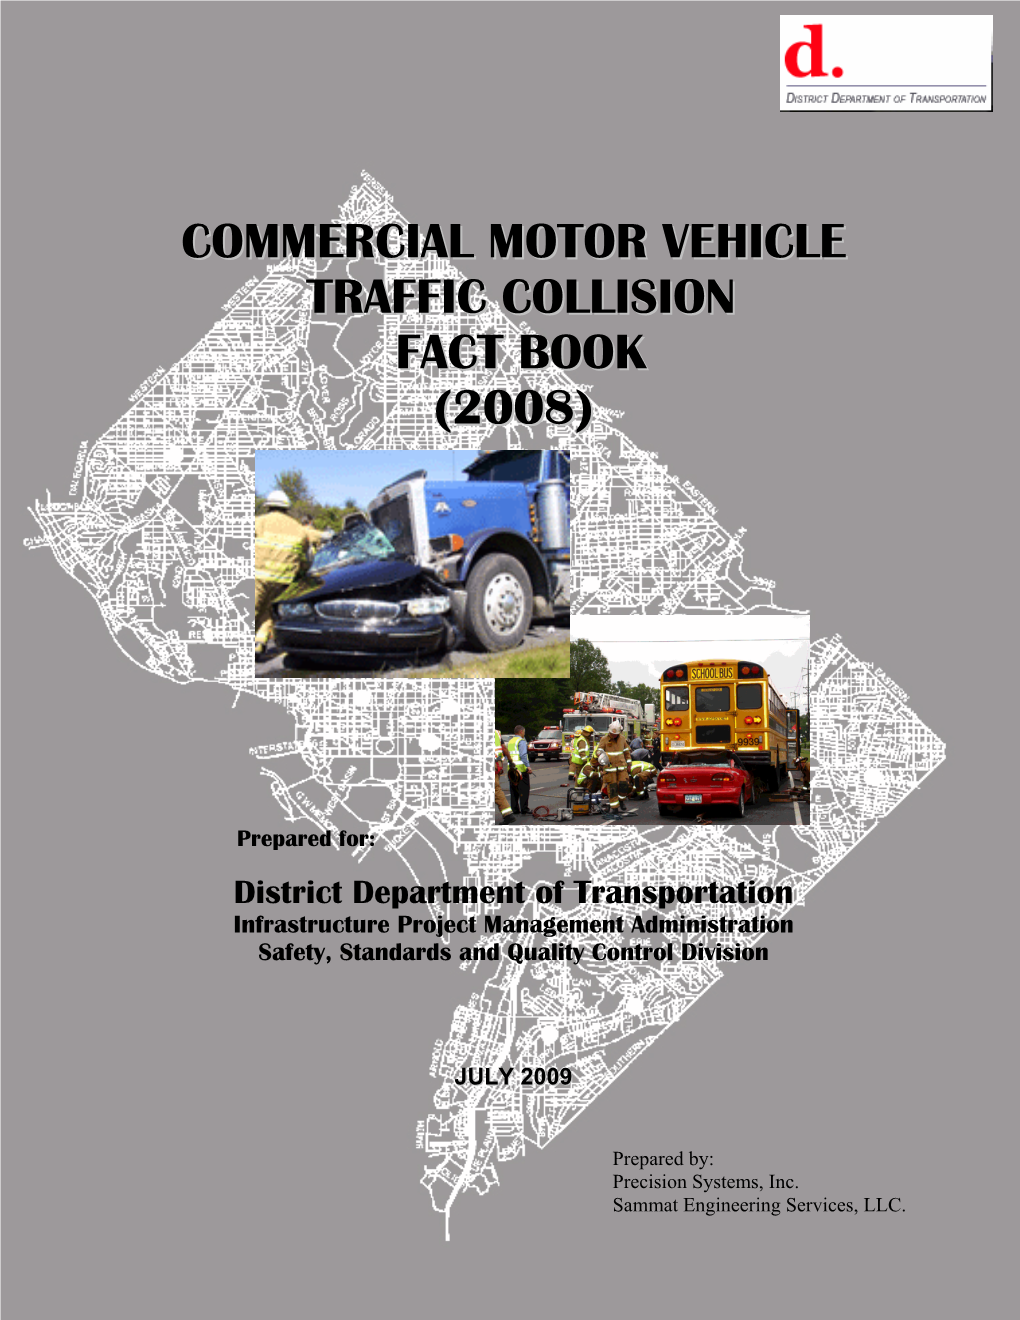 Commercial Motor Vehicle Traffic Collision Fact Book POKA-2006-T-0028-JJ